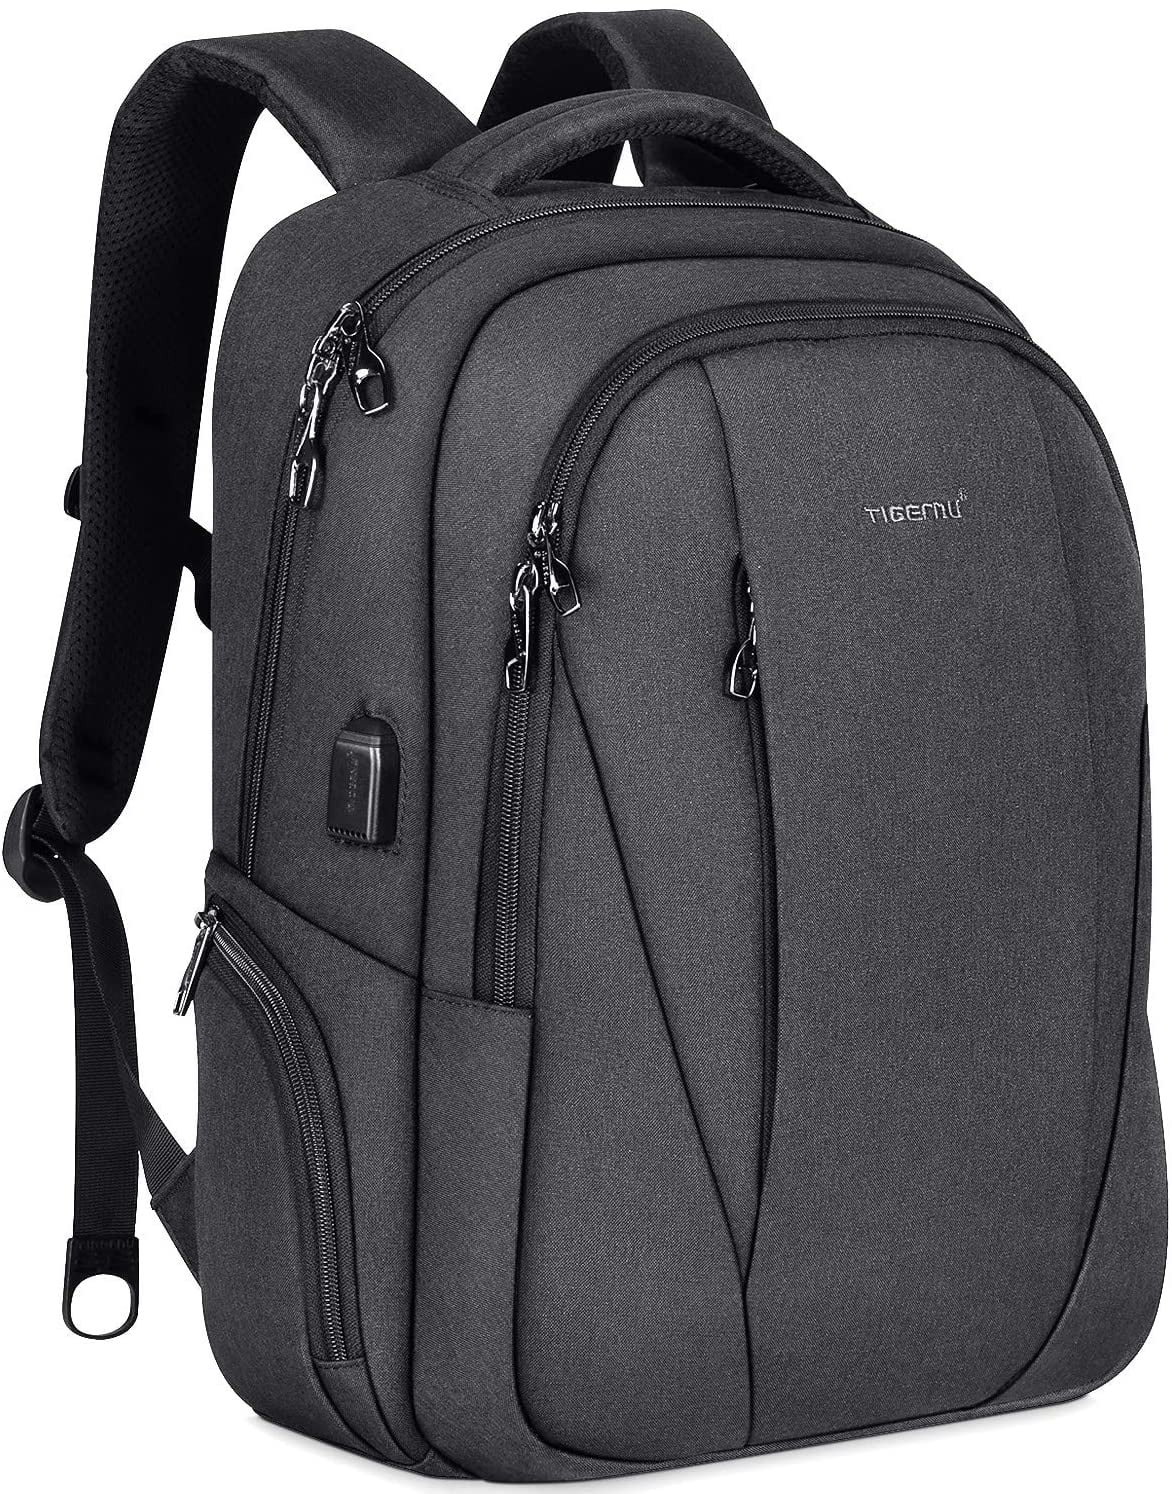 Taiyoko Laptop Backpack for Men Fits 15.6 Inch Notebook With USB